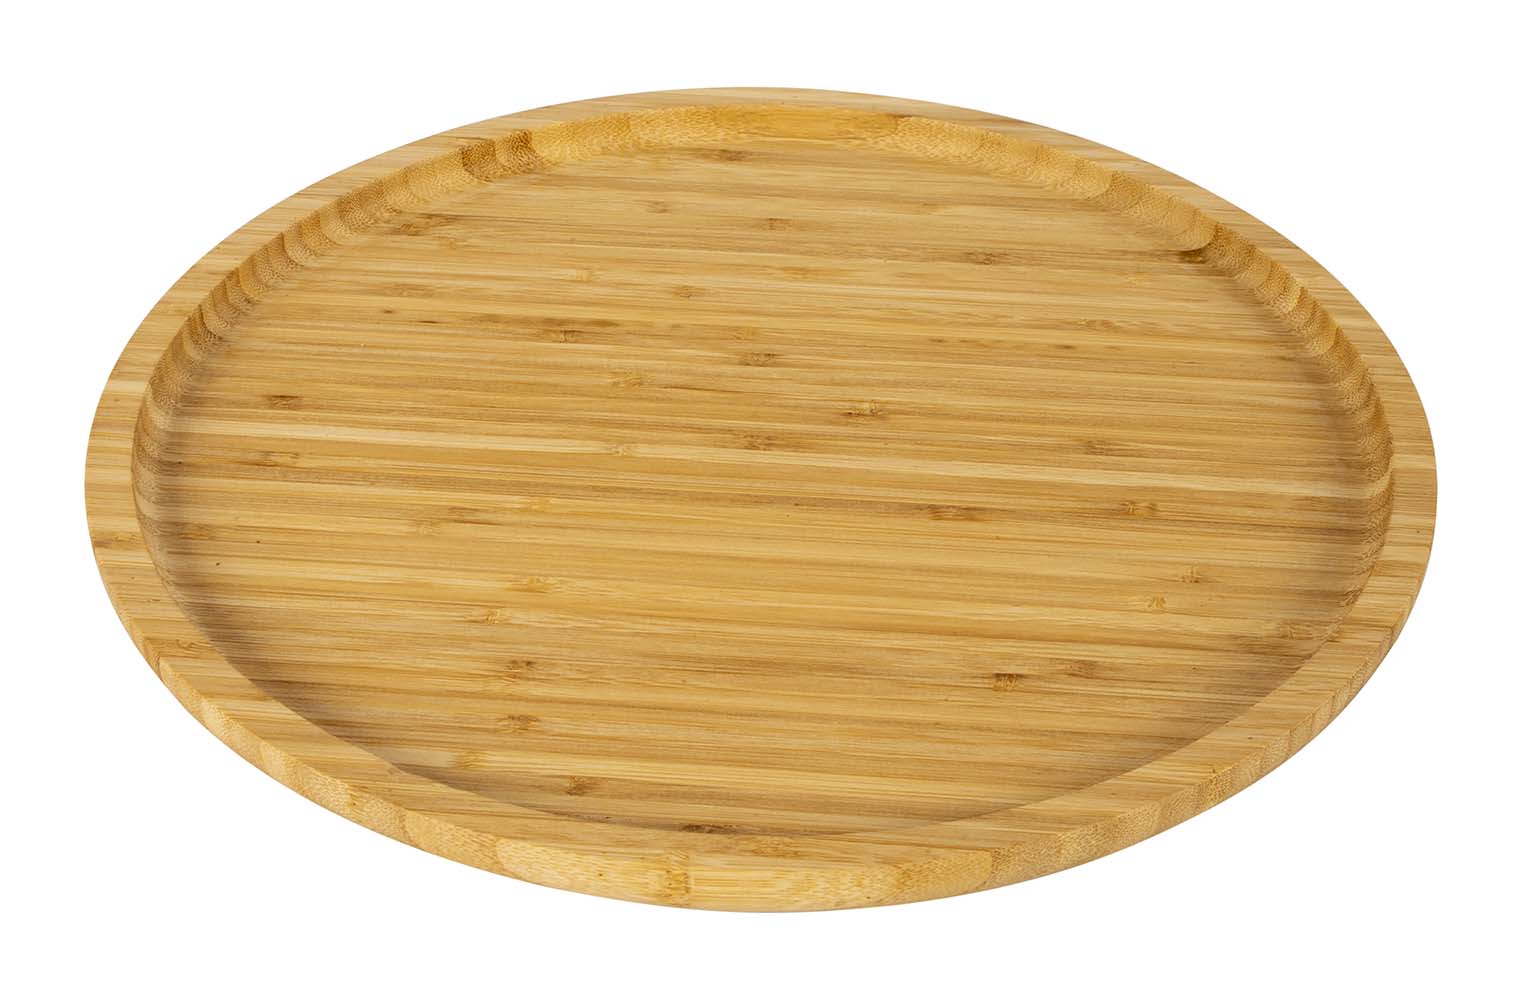 6123100 A sturdy and natural bamboo bottom board. Ideal for home and garden use but also very easy to take with you on vacation. Provides a creative decoration of the table and is also very nice to use as a decorative bowl or tray. A set of 2 bottom plates.